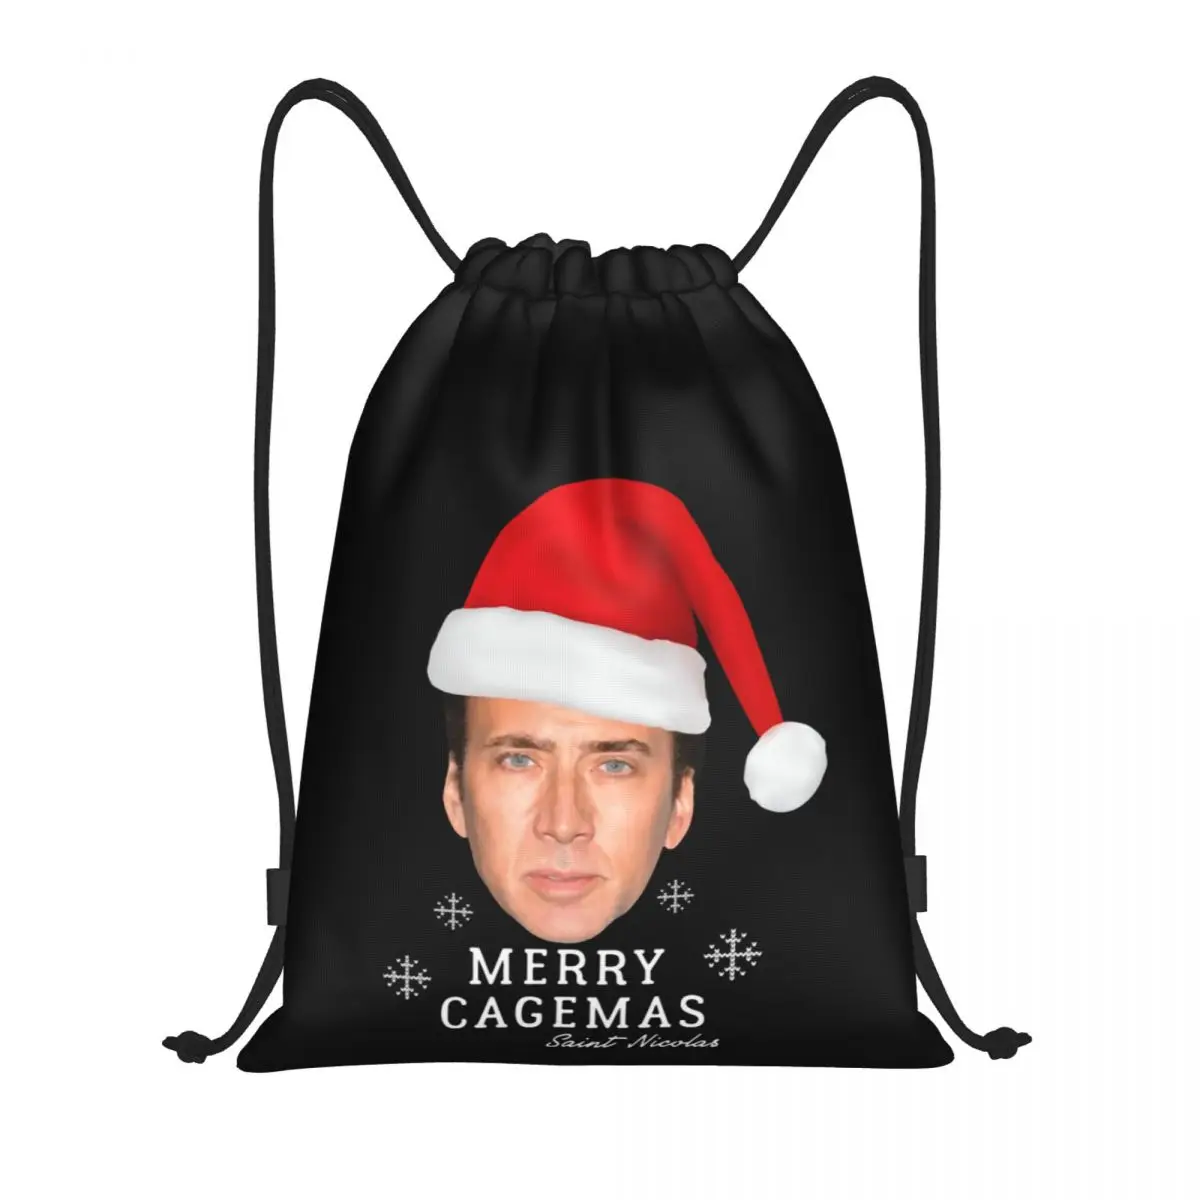 

Nicolas Cage John Travolta Face 18 Novelty Drawstring Bags Gym Bag Field pack Sports activities Backpack Graphic